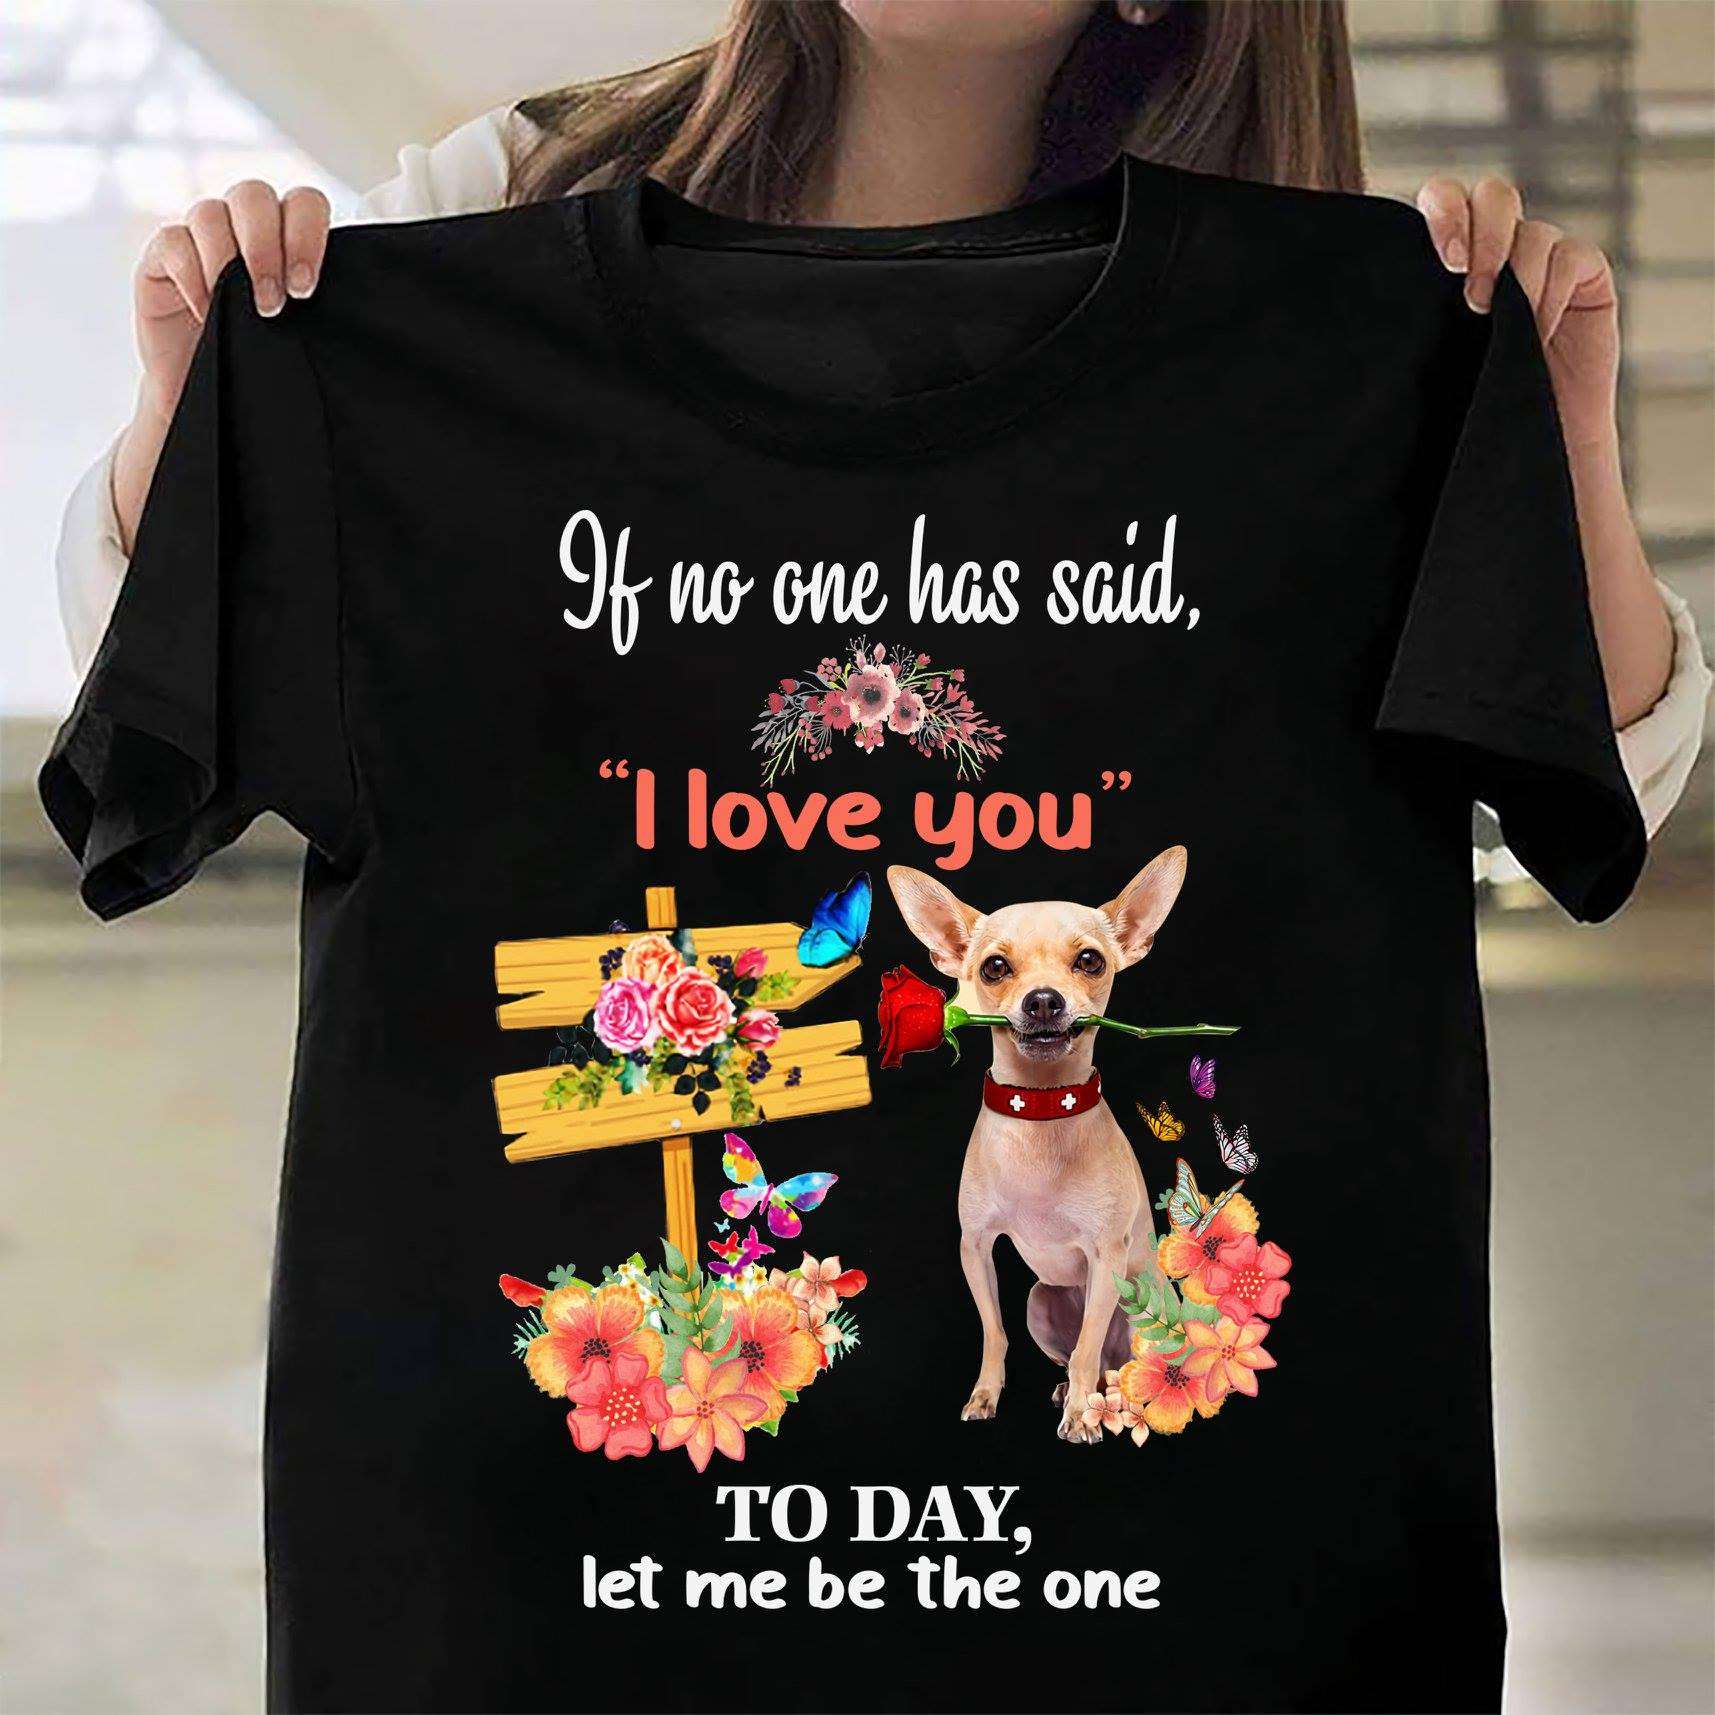 If no one has said, I love you today, let me be the one - Chihuahua with rose, chihuahua dog lover